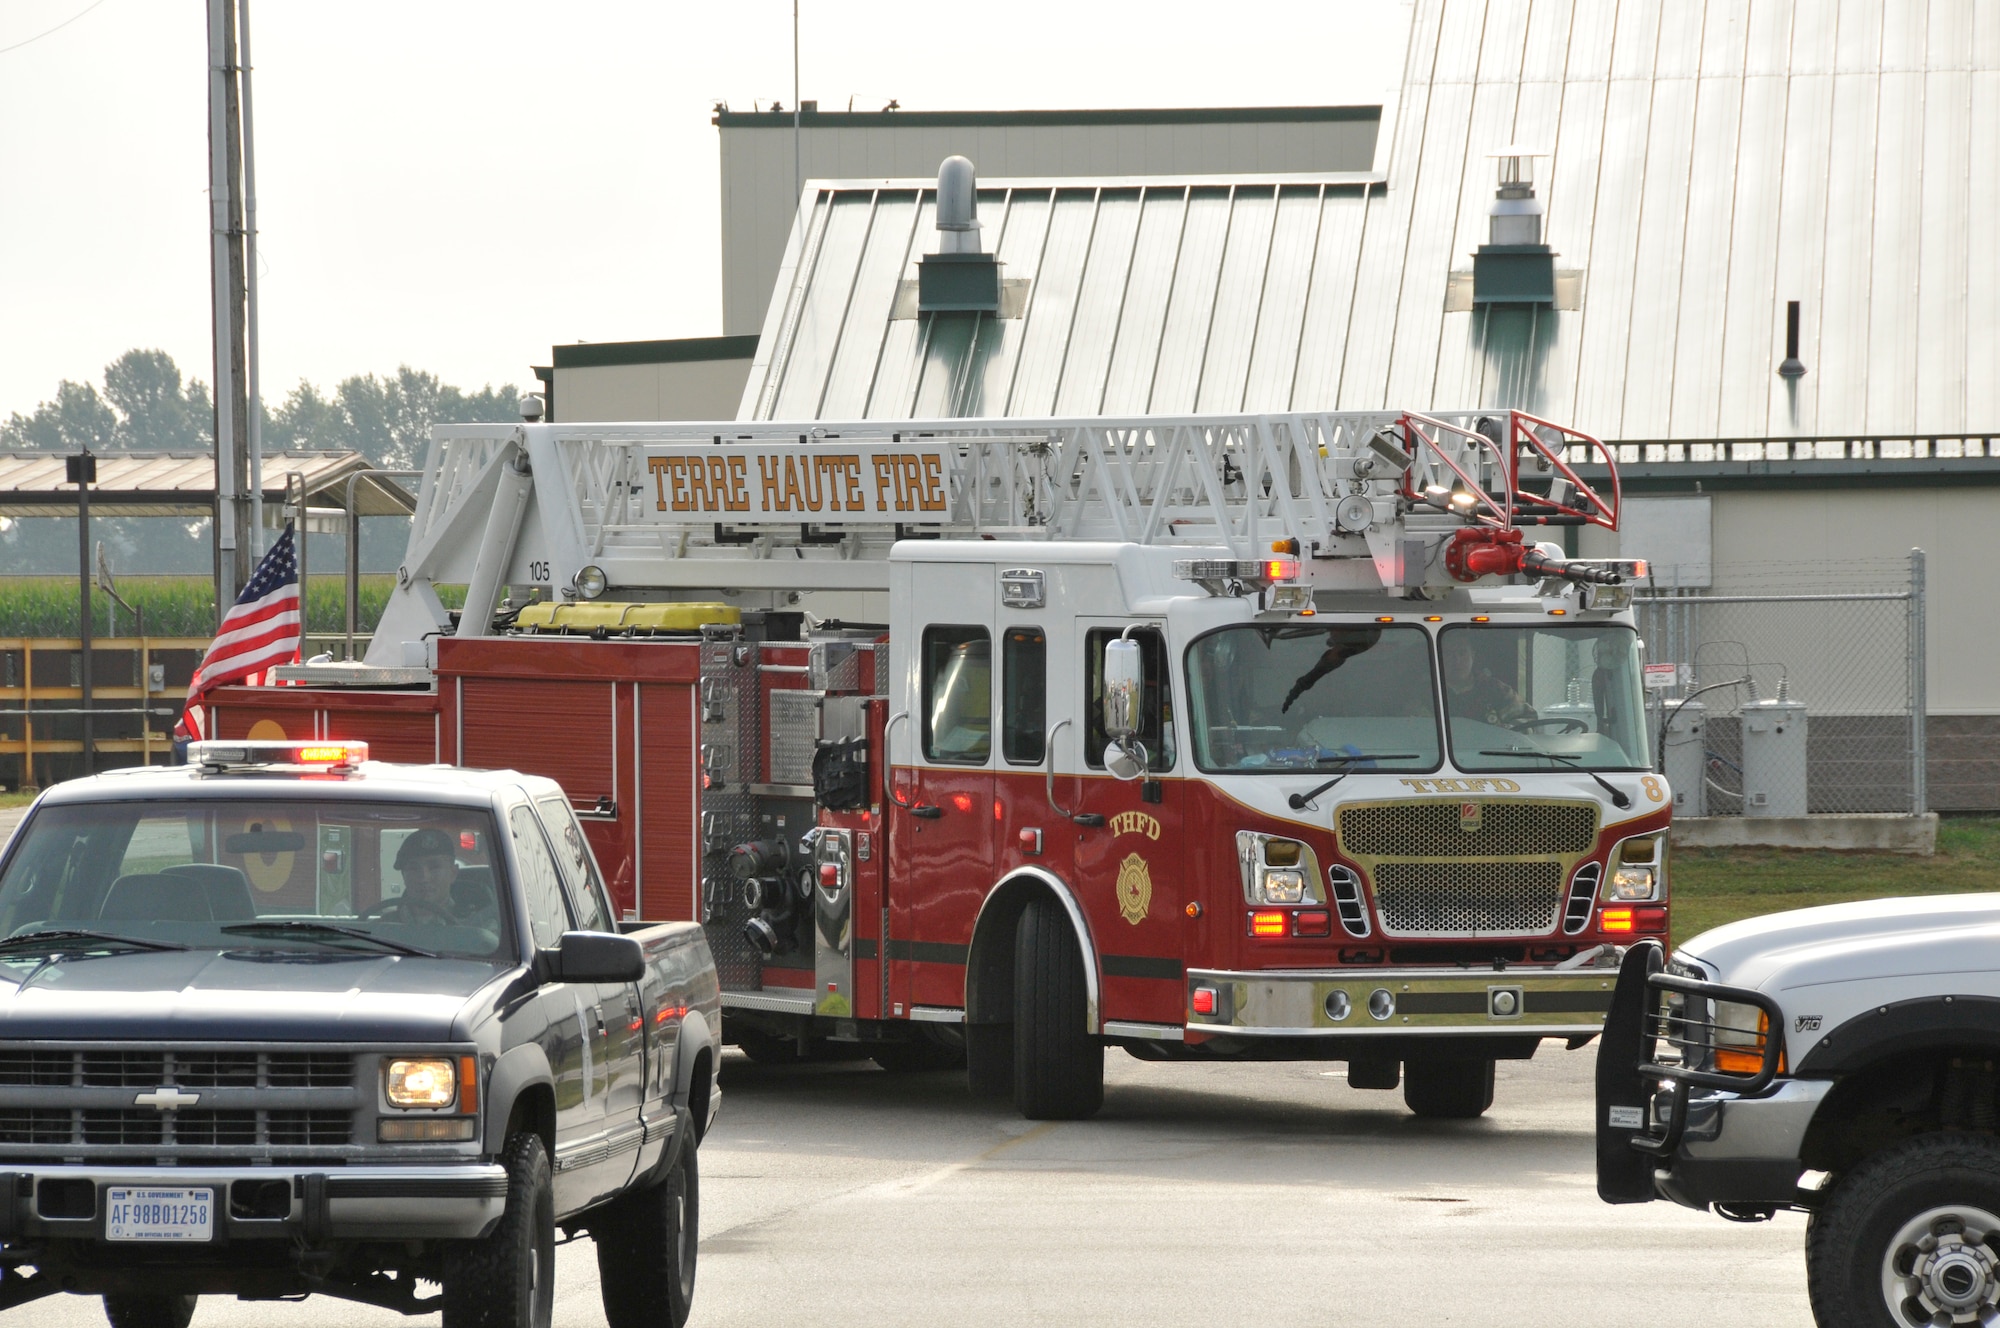 Airmen from the 181 Intelligence Wing,  along with the Terre Haute Fire Department,  conducted a fire response exercise at the 181 Intelligence Wing, July 29, 2015. The 181 IW Inspection Team used this exercise to evaluate response time, current obstacles, and existing checklists and procedures. Building our relations with community organizations is key to the Indiana Air National Guard. (U.S. Air National Guard photo by Senior Master Sgt. John S. Chapman/Released)